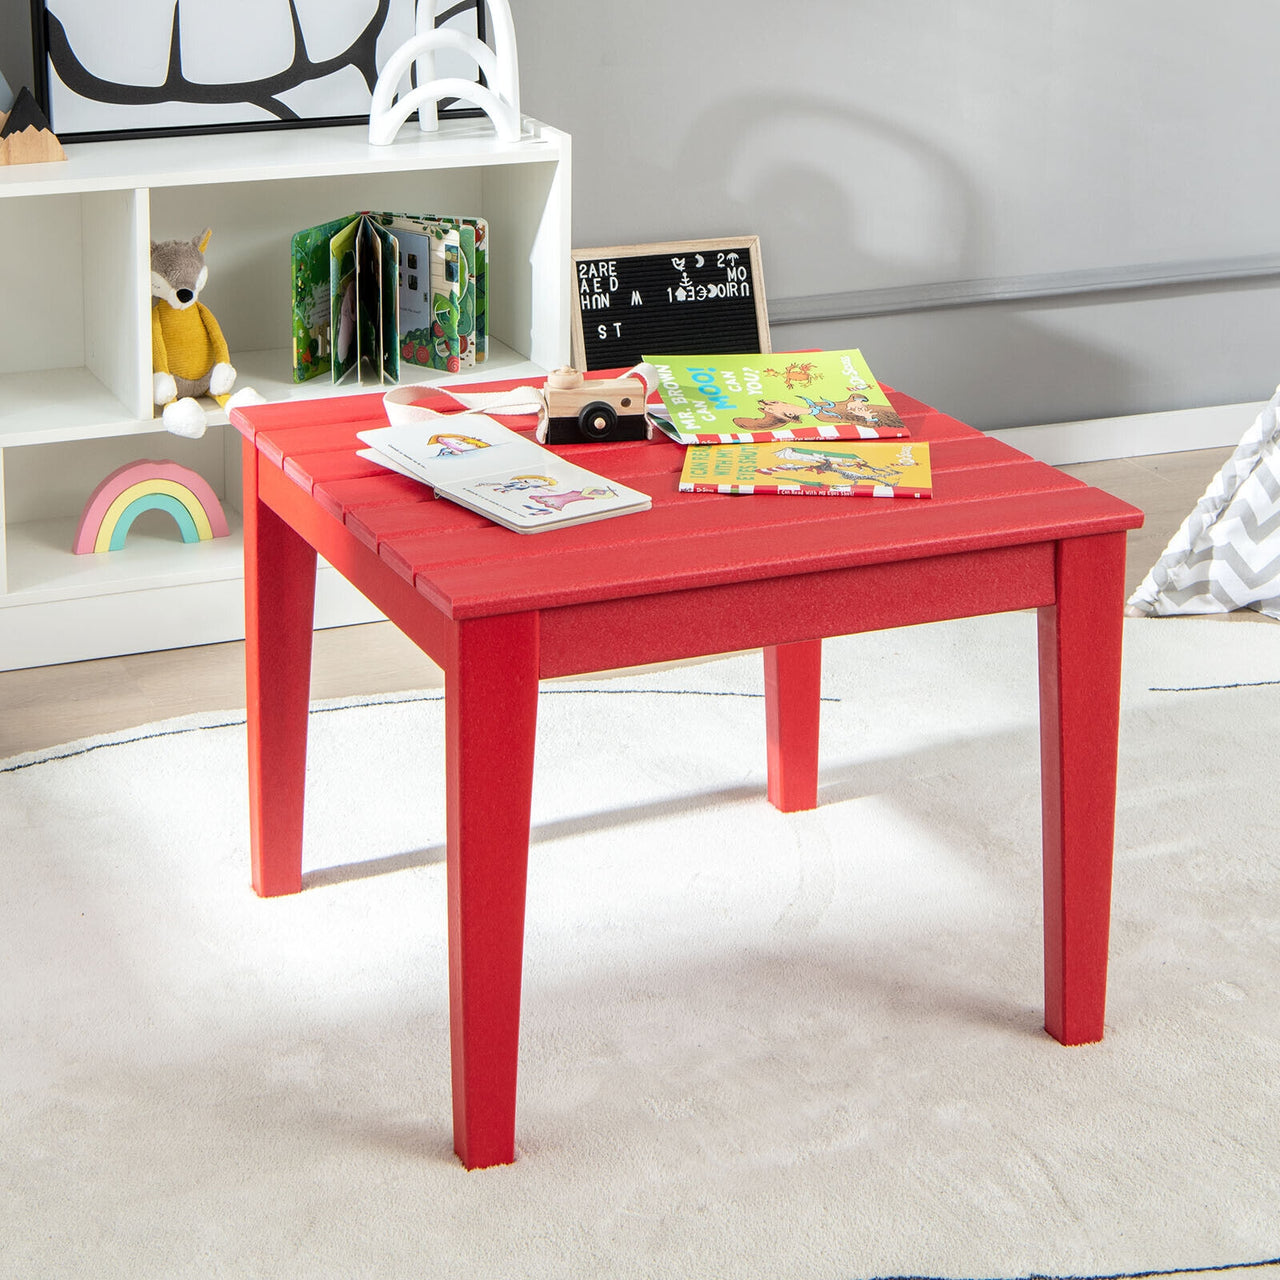 25.5 Inch Square Kids Activity Play Table - Gallery View 6 of 9